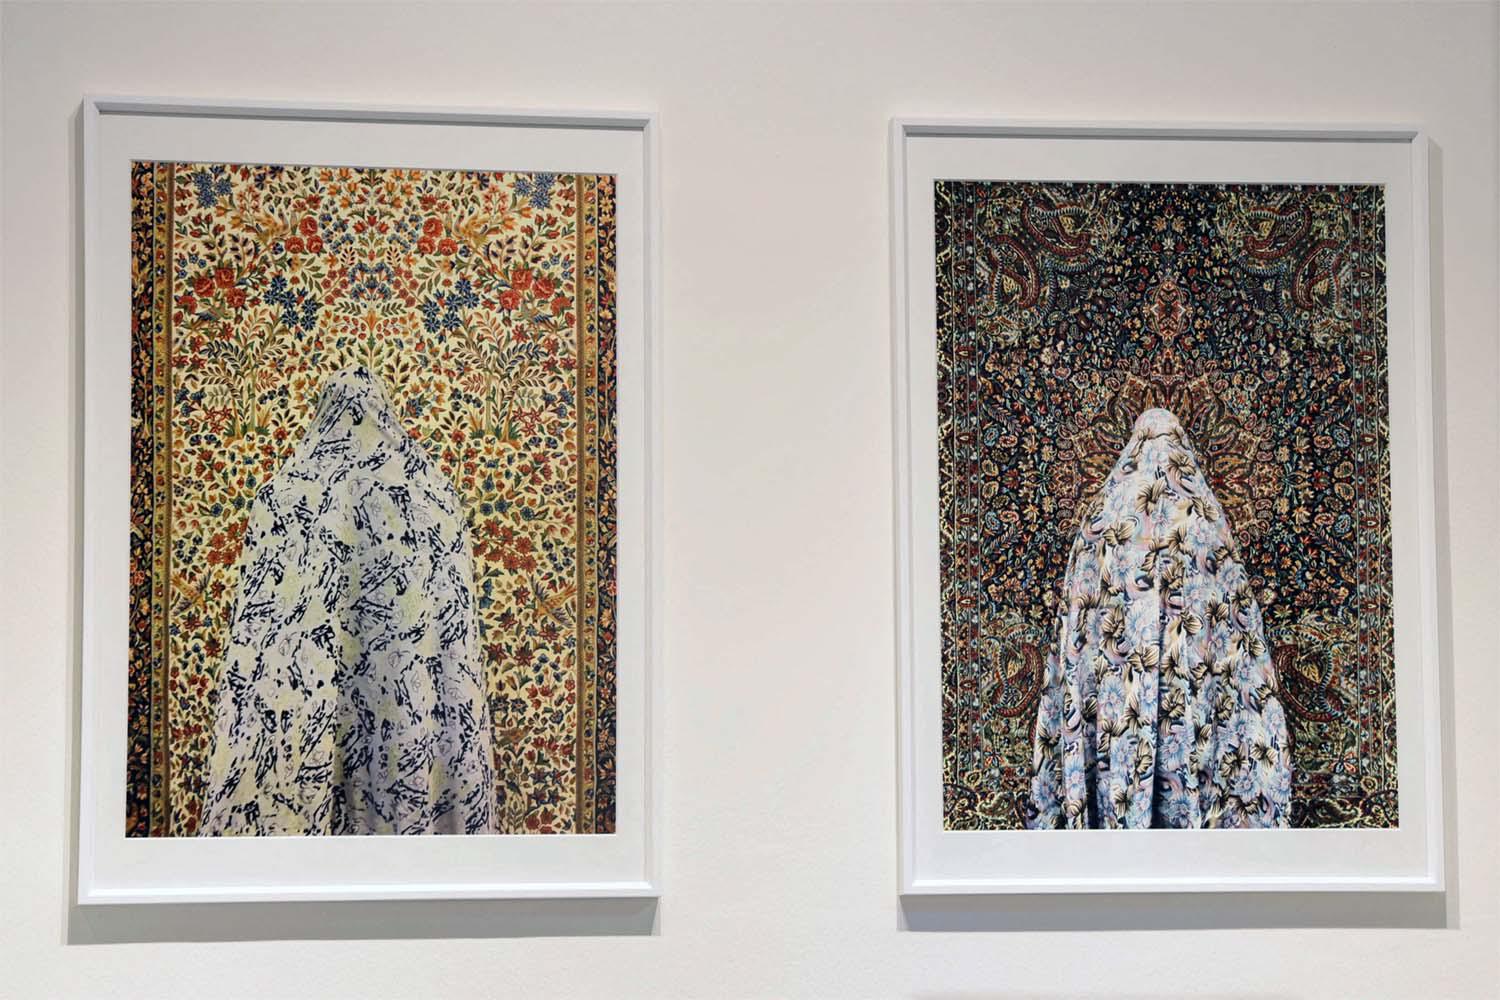 The women are photographed from behind and the pattern of their chador